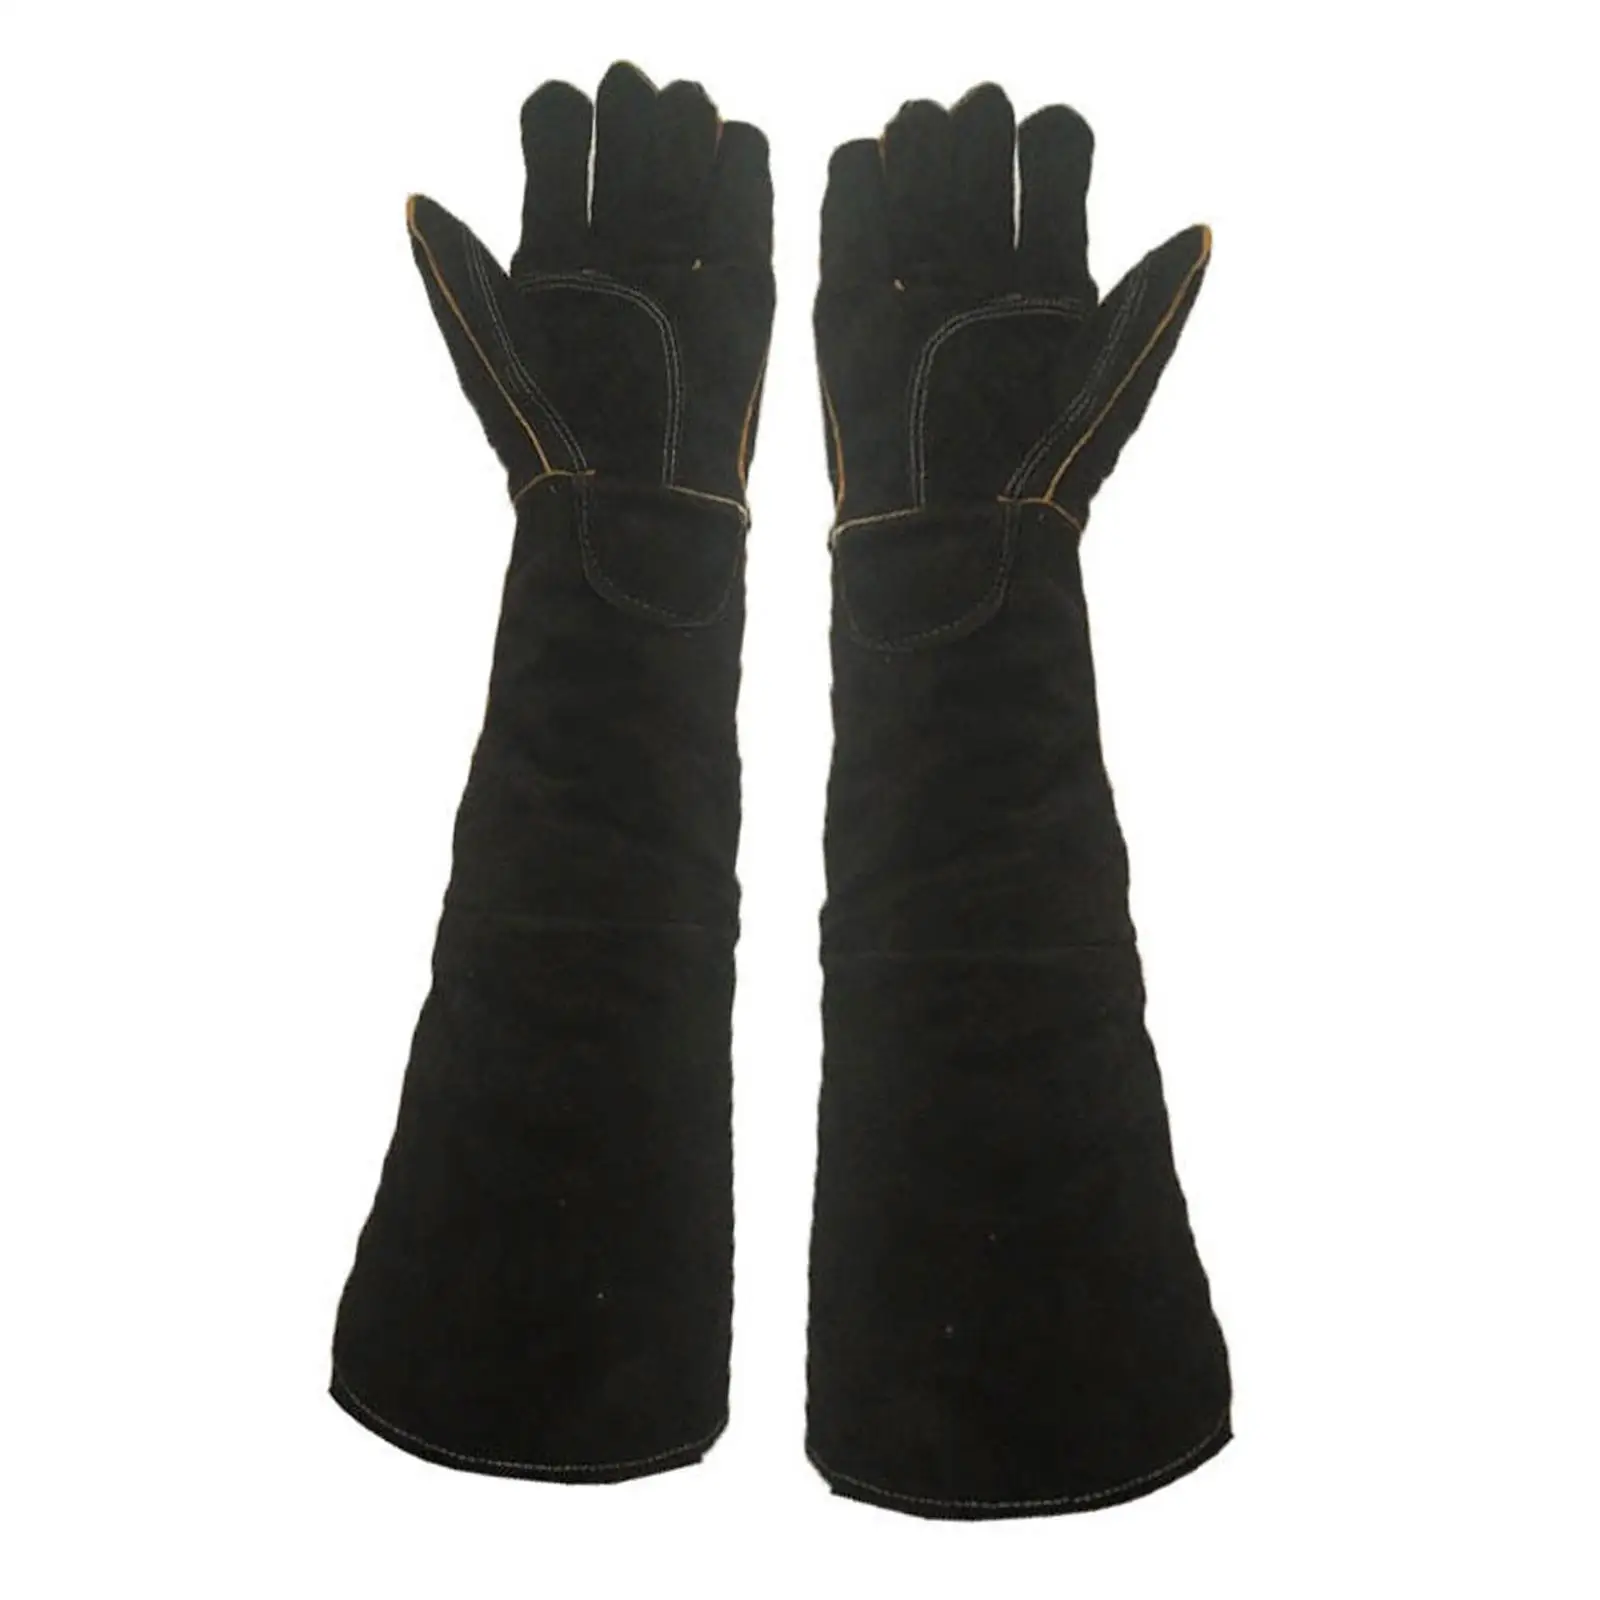 Animal Handling Gloves Long Sleeve Durable Protective Gloves for Gardening Zoo Staff Training Protection Cats Snake